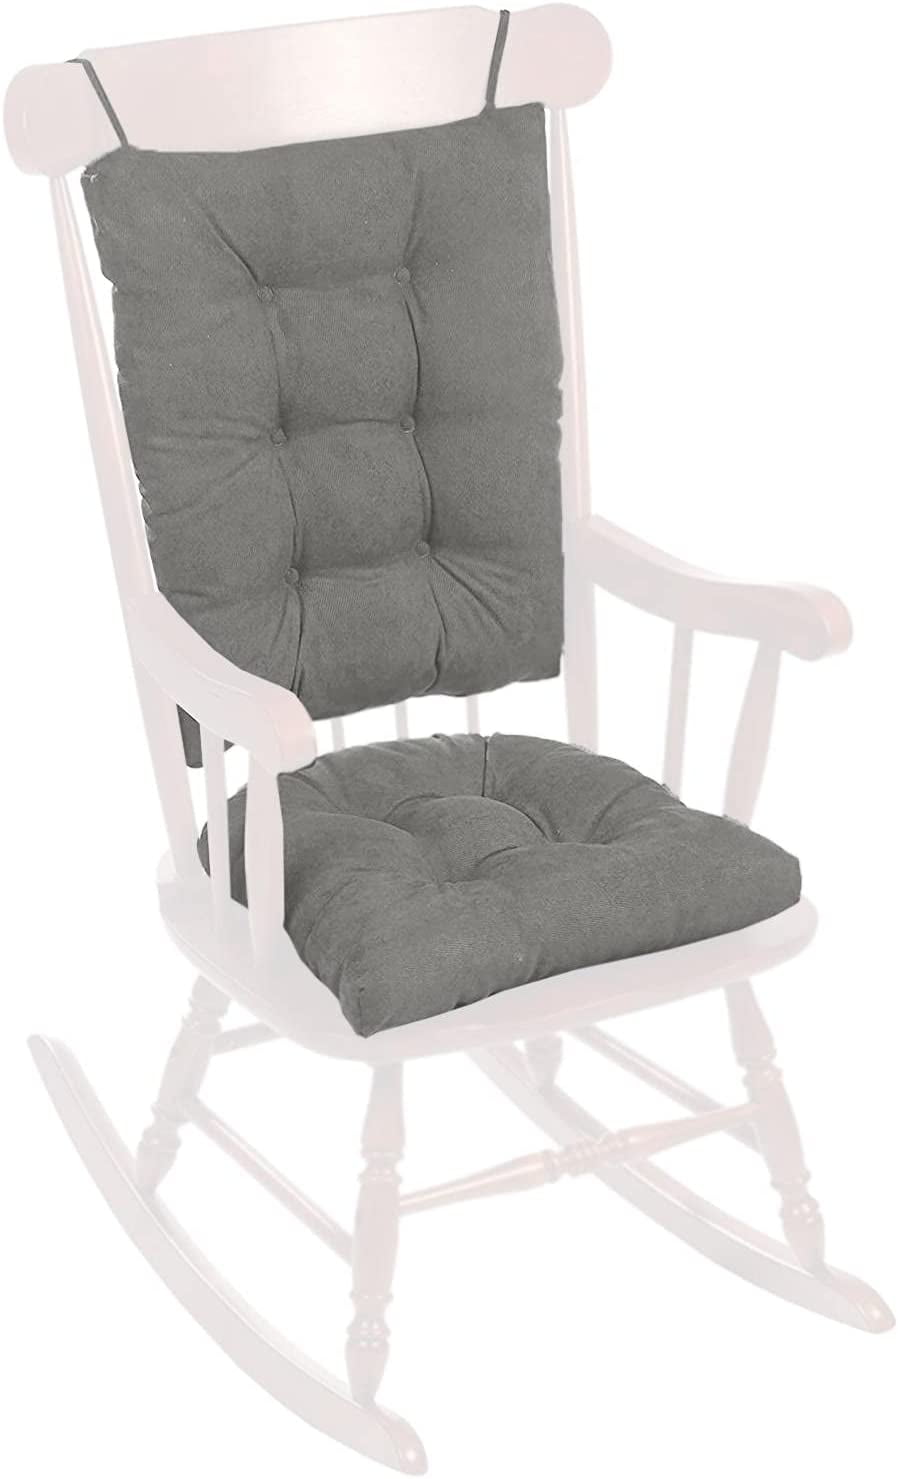 Rocking Chair Cushion Pad Seat and Back Cushion Indoor/Outdoor Chair Cushions Set Soft Thickened Patio Chaise Lounger Cushion Overstuffed Patio Chair Cushion 2 Pieces Gray 